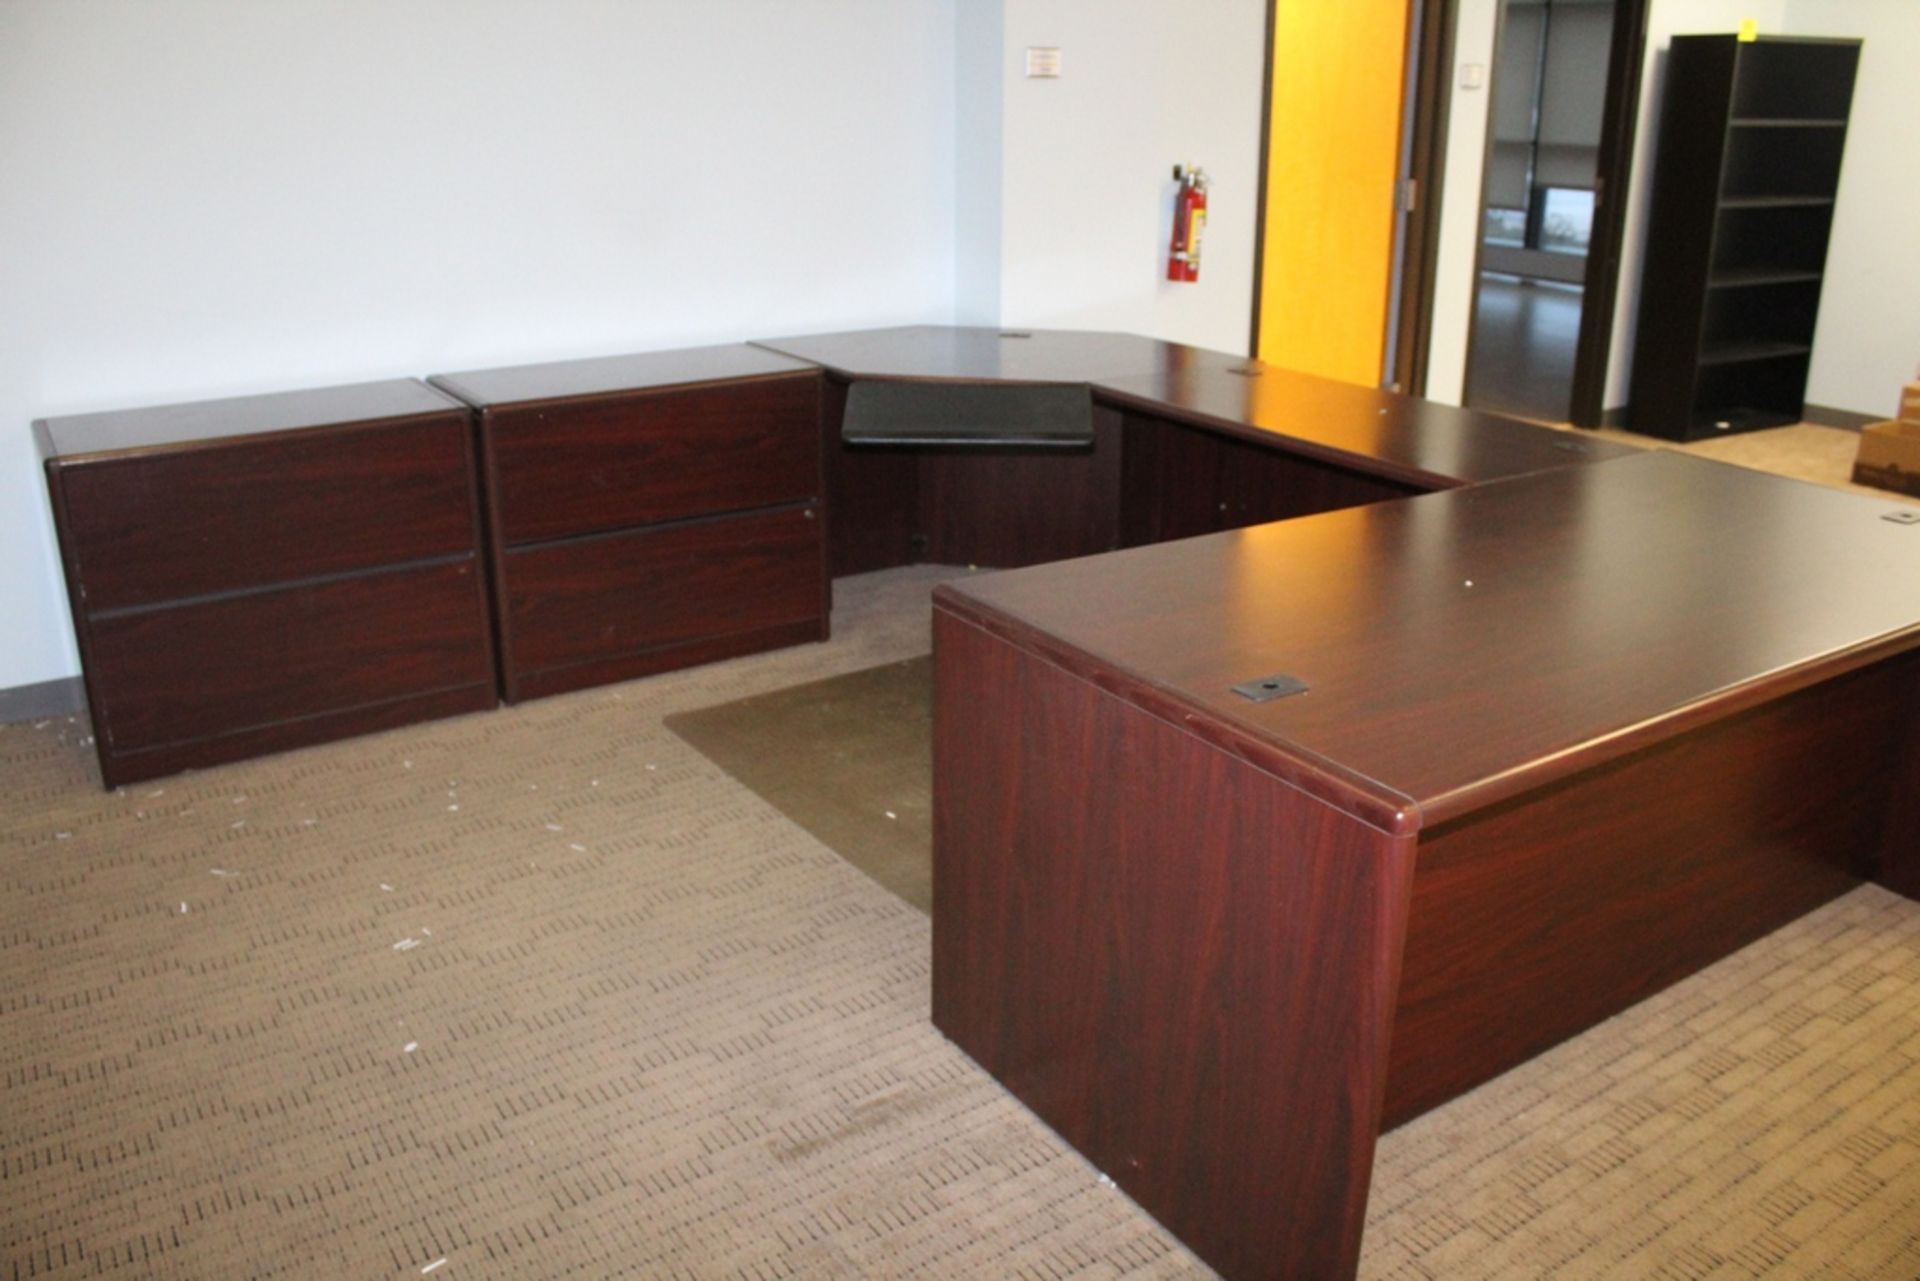 LARGE WOOD U-SHAPED DESK, 124" X 72" WITH TWO WOOD LATERAL FILE CABINETS - Image 2 of 4